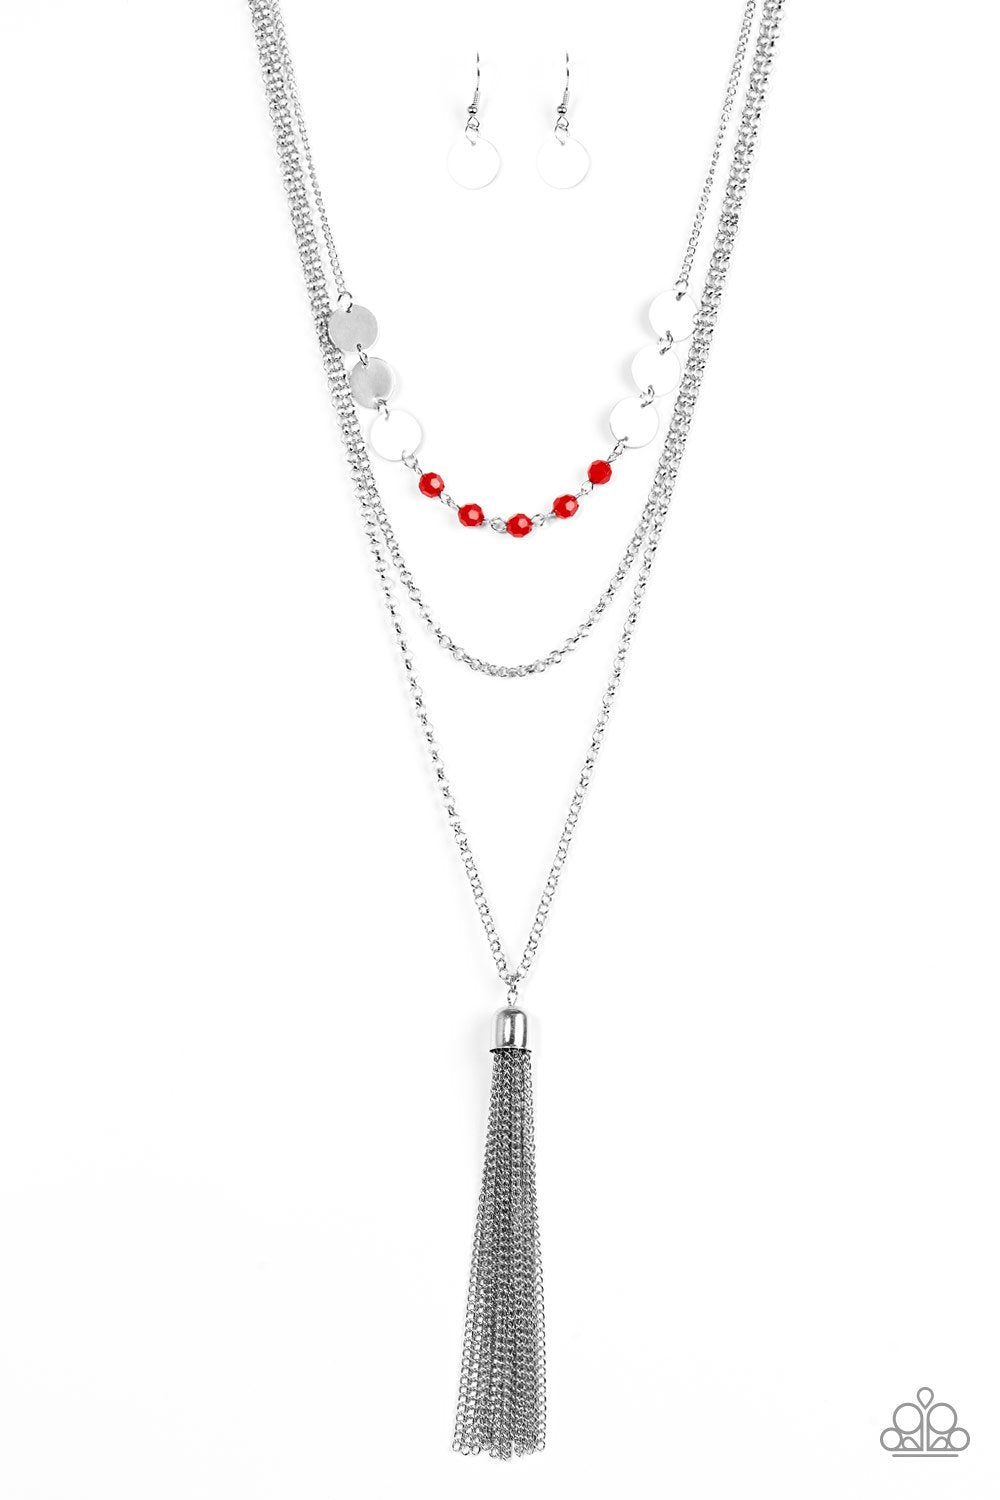 Paparazzi Necklace ~ Celebration of Chic - Red